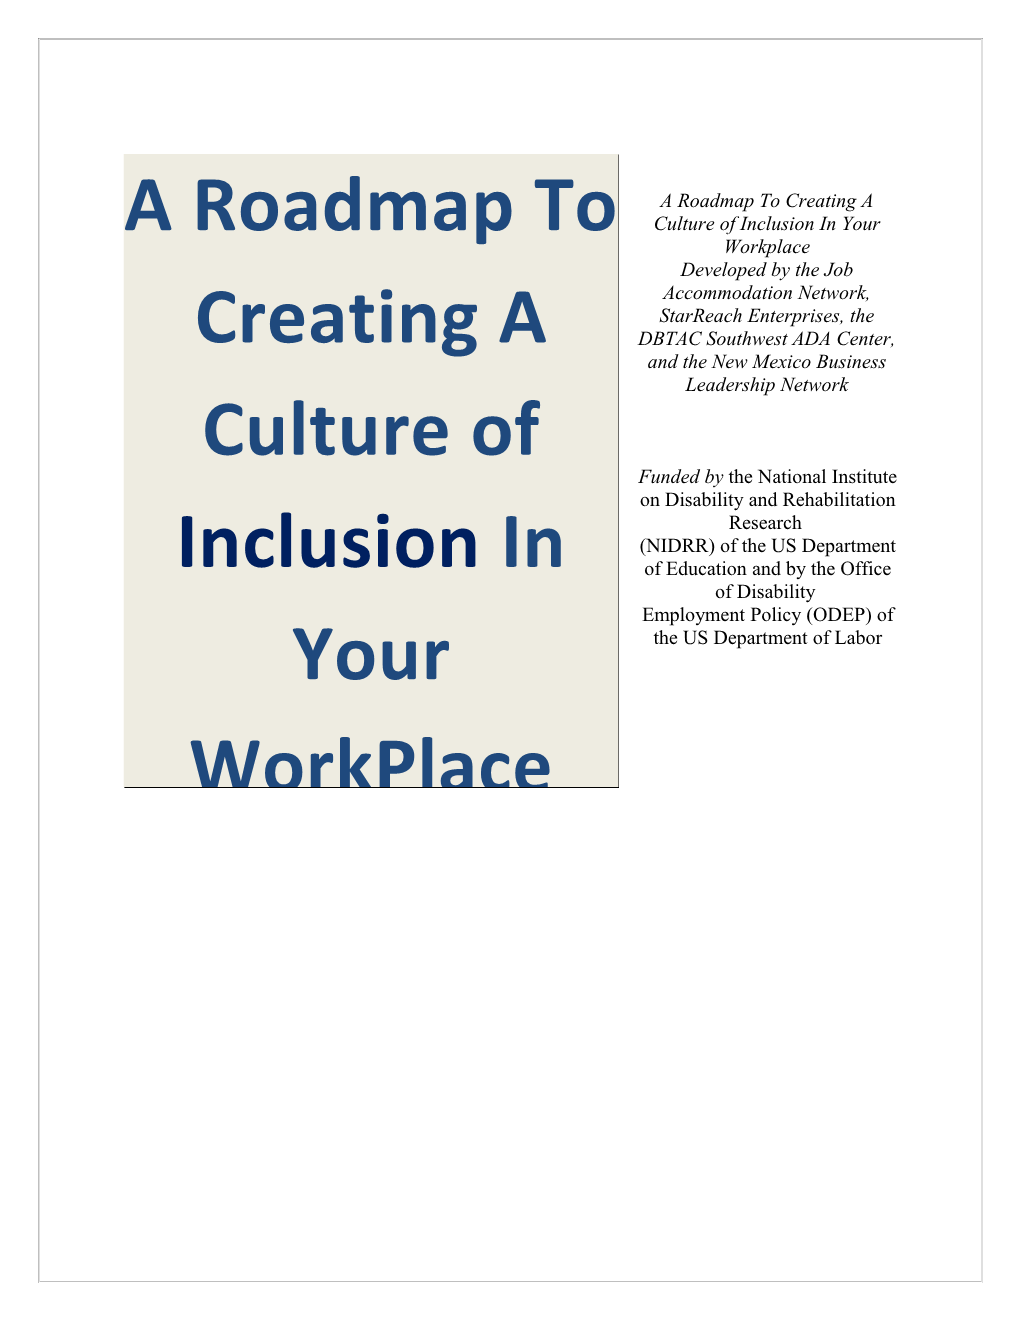 A Roadmap to Creating a Culture of Inclusion in Your Workplace